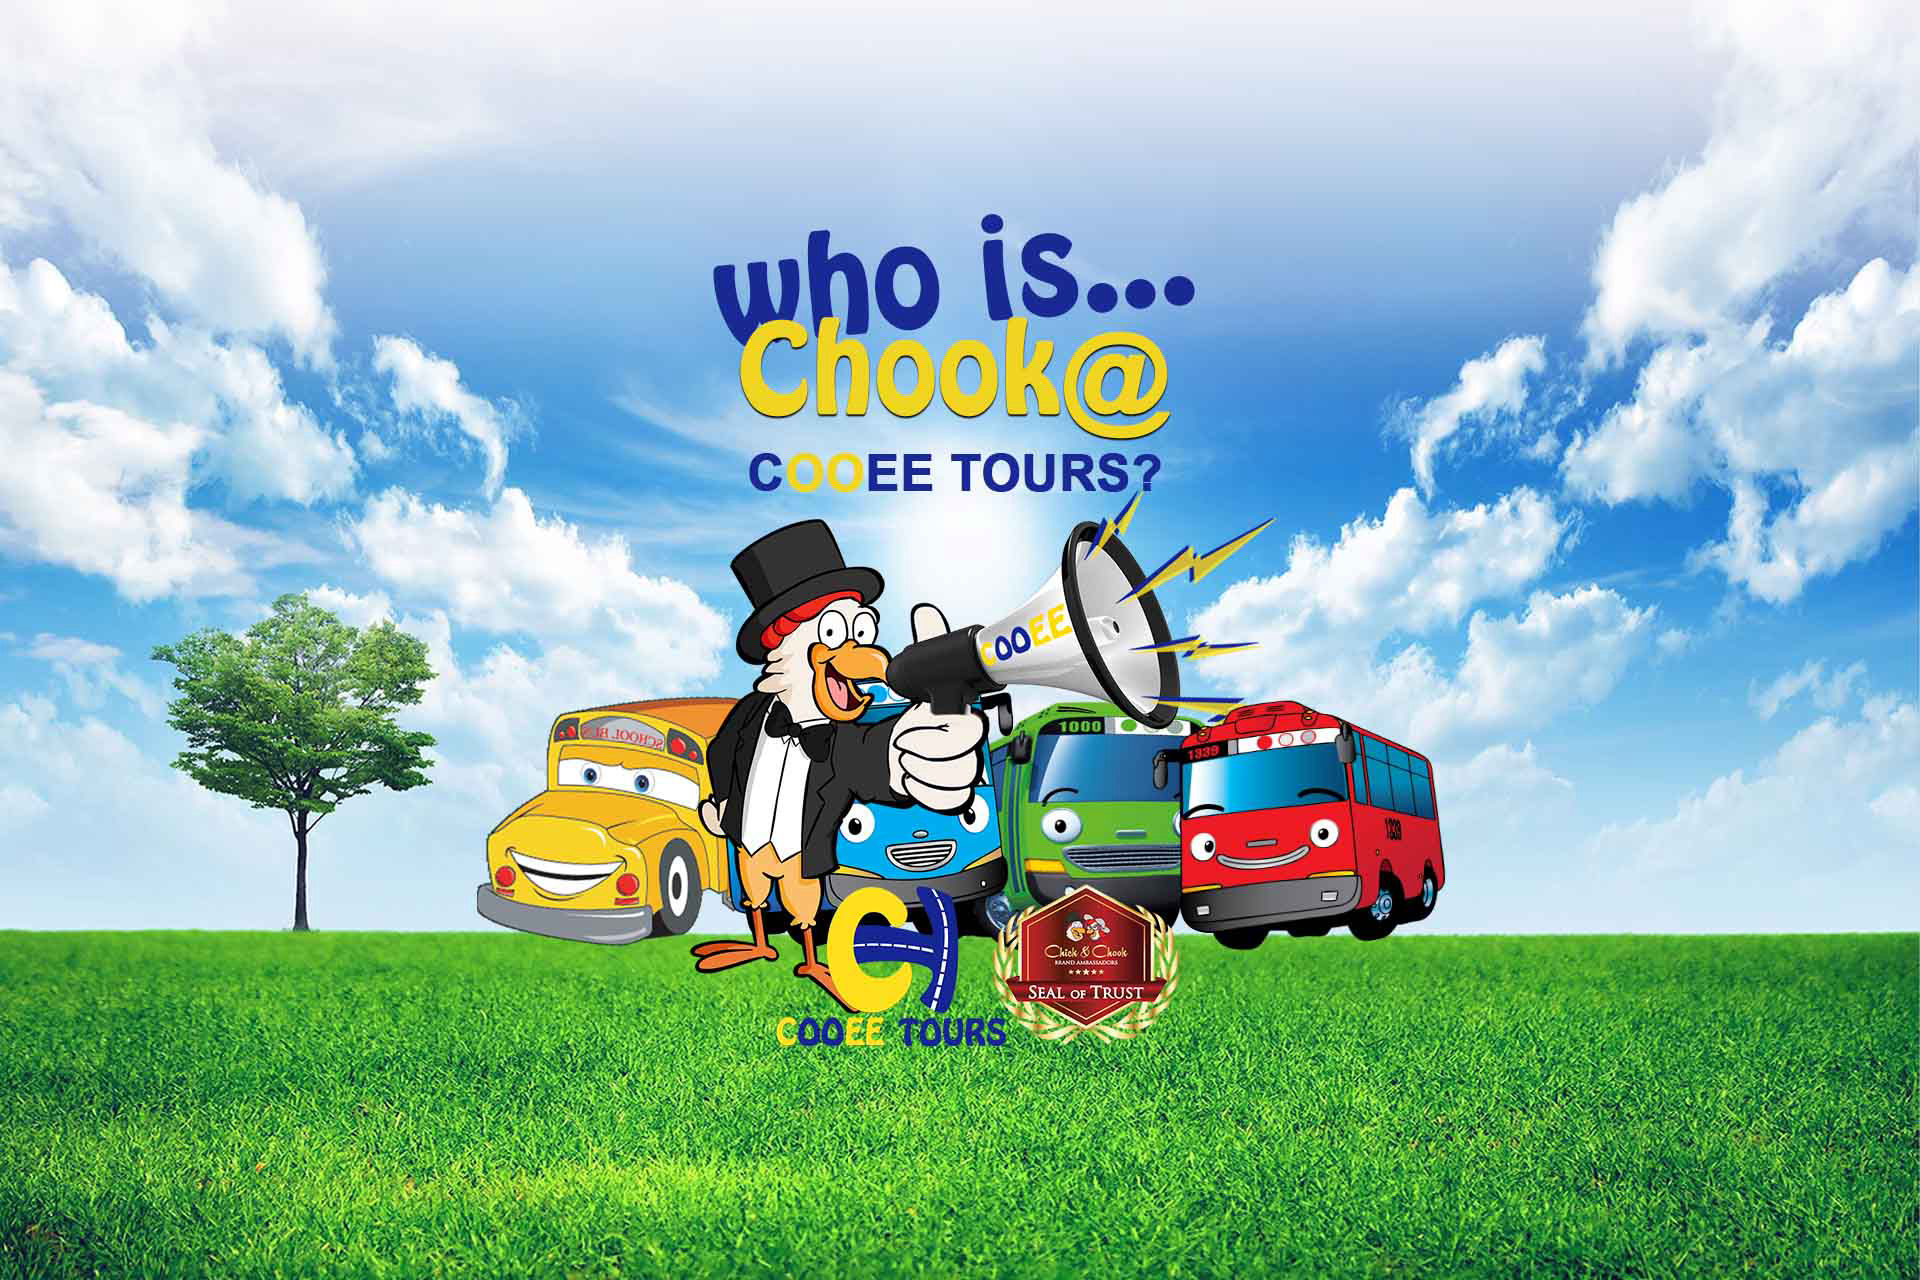 Who Is Chook at Cooee Tours, He is a Brand Ambassador with integrity and style, Cheap Day Tours, 2 and 3 day tours, inexpensive day tours with reliable company, Cooee Tours Australia Bus Tour Company with Mercedes Benz Buses for Winery Tours, Nature Tours, City Tours, Fun Tours, Golf Tours, Queensland, Brisbane, Toowoomba, Gold Coast, Sunshine Coast, Cairns, Wide Bay, Bryon Bay, Sydney, Noosa Heads, golfing tours that include kids